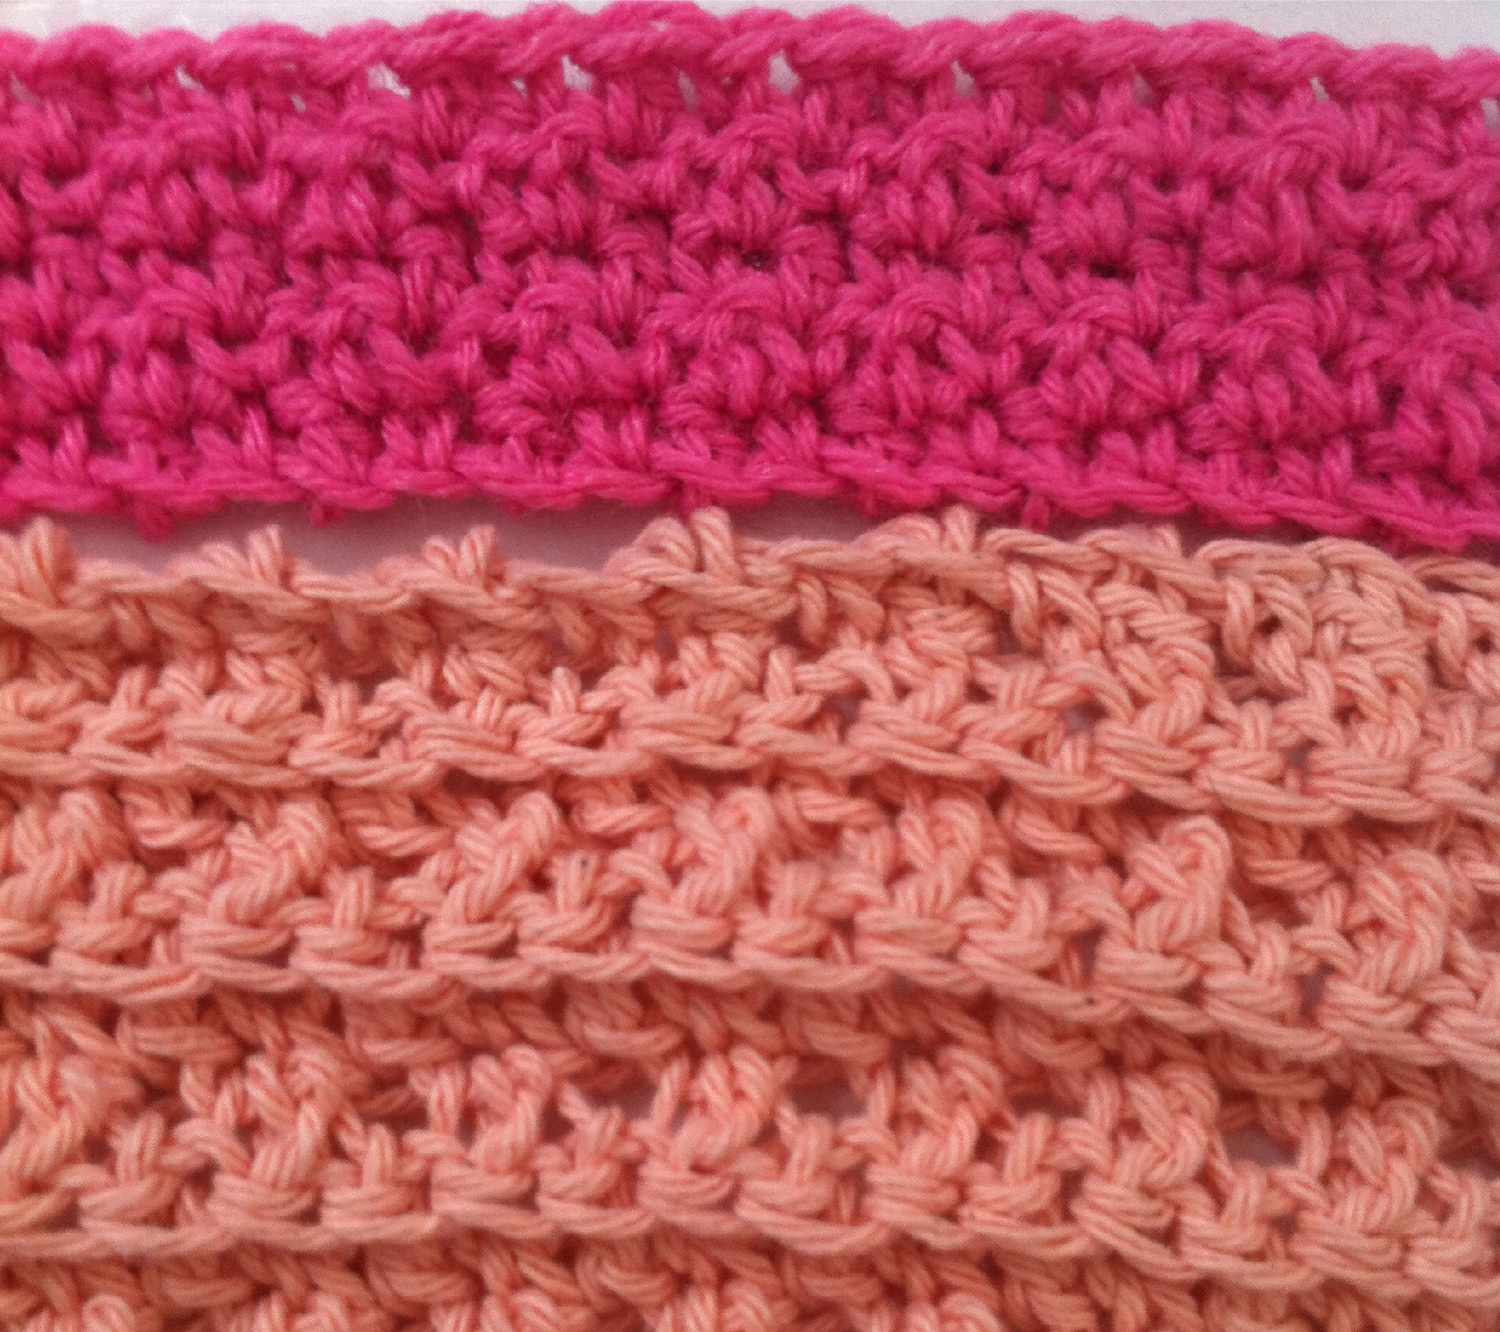 Ribbed crochet seed stitch